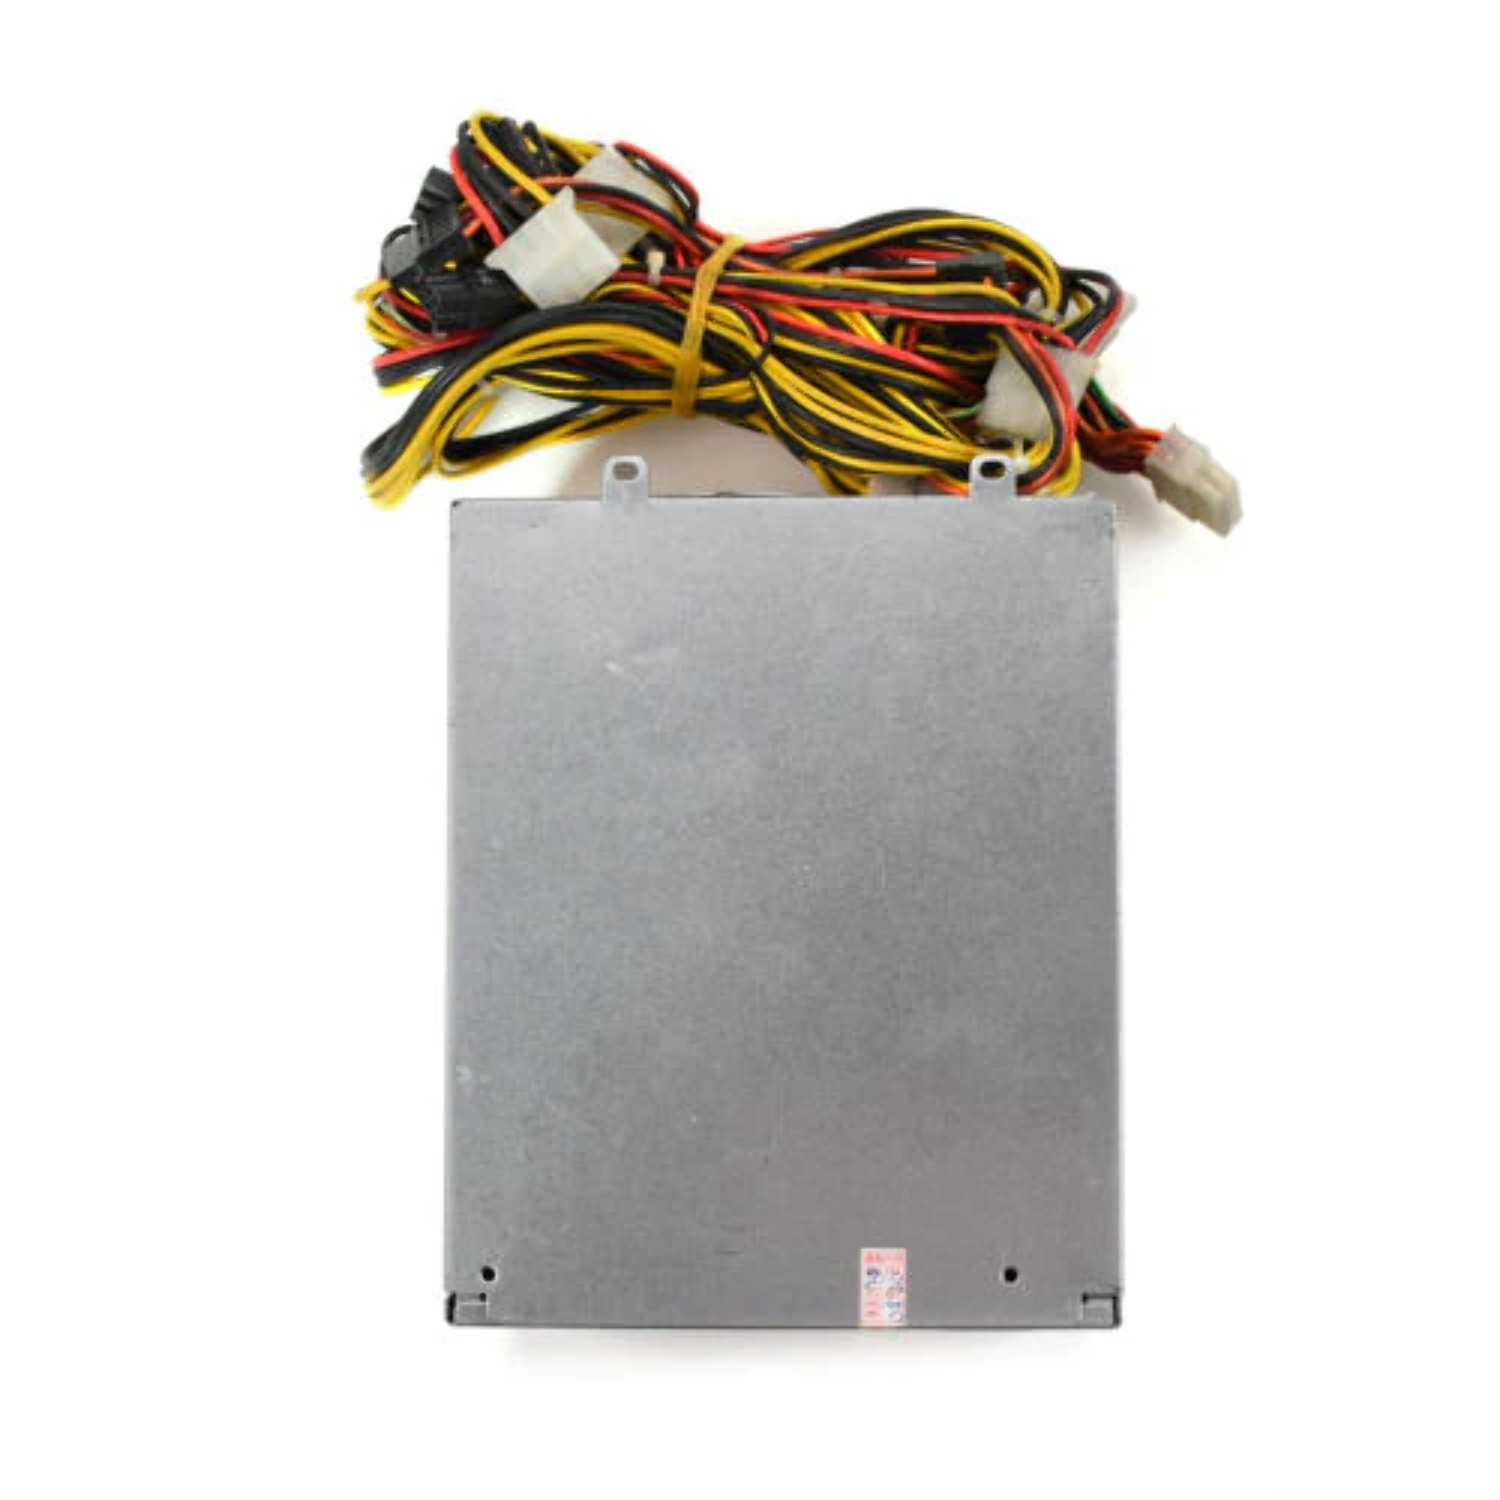 For SuperMicro PWS-865-PQ 865W Power Supply for Tower Workstation Fonte - image 4 of 11